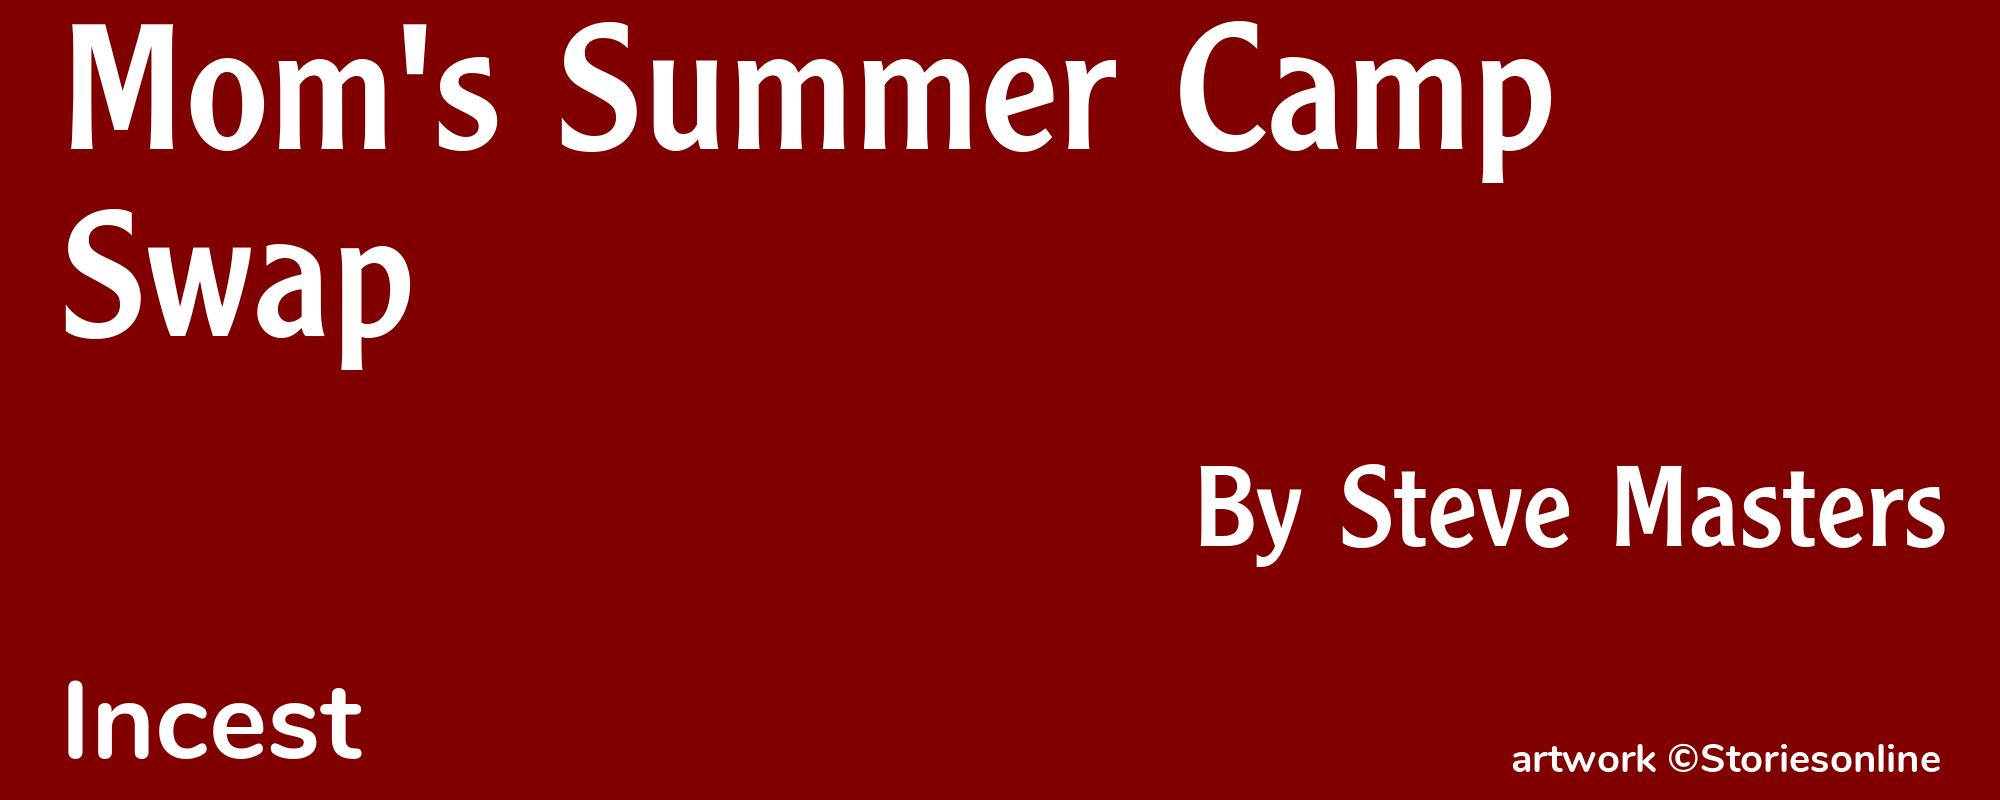 Mom's Summer Camp Swap - Cover